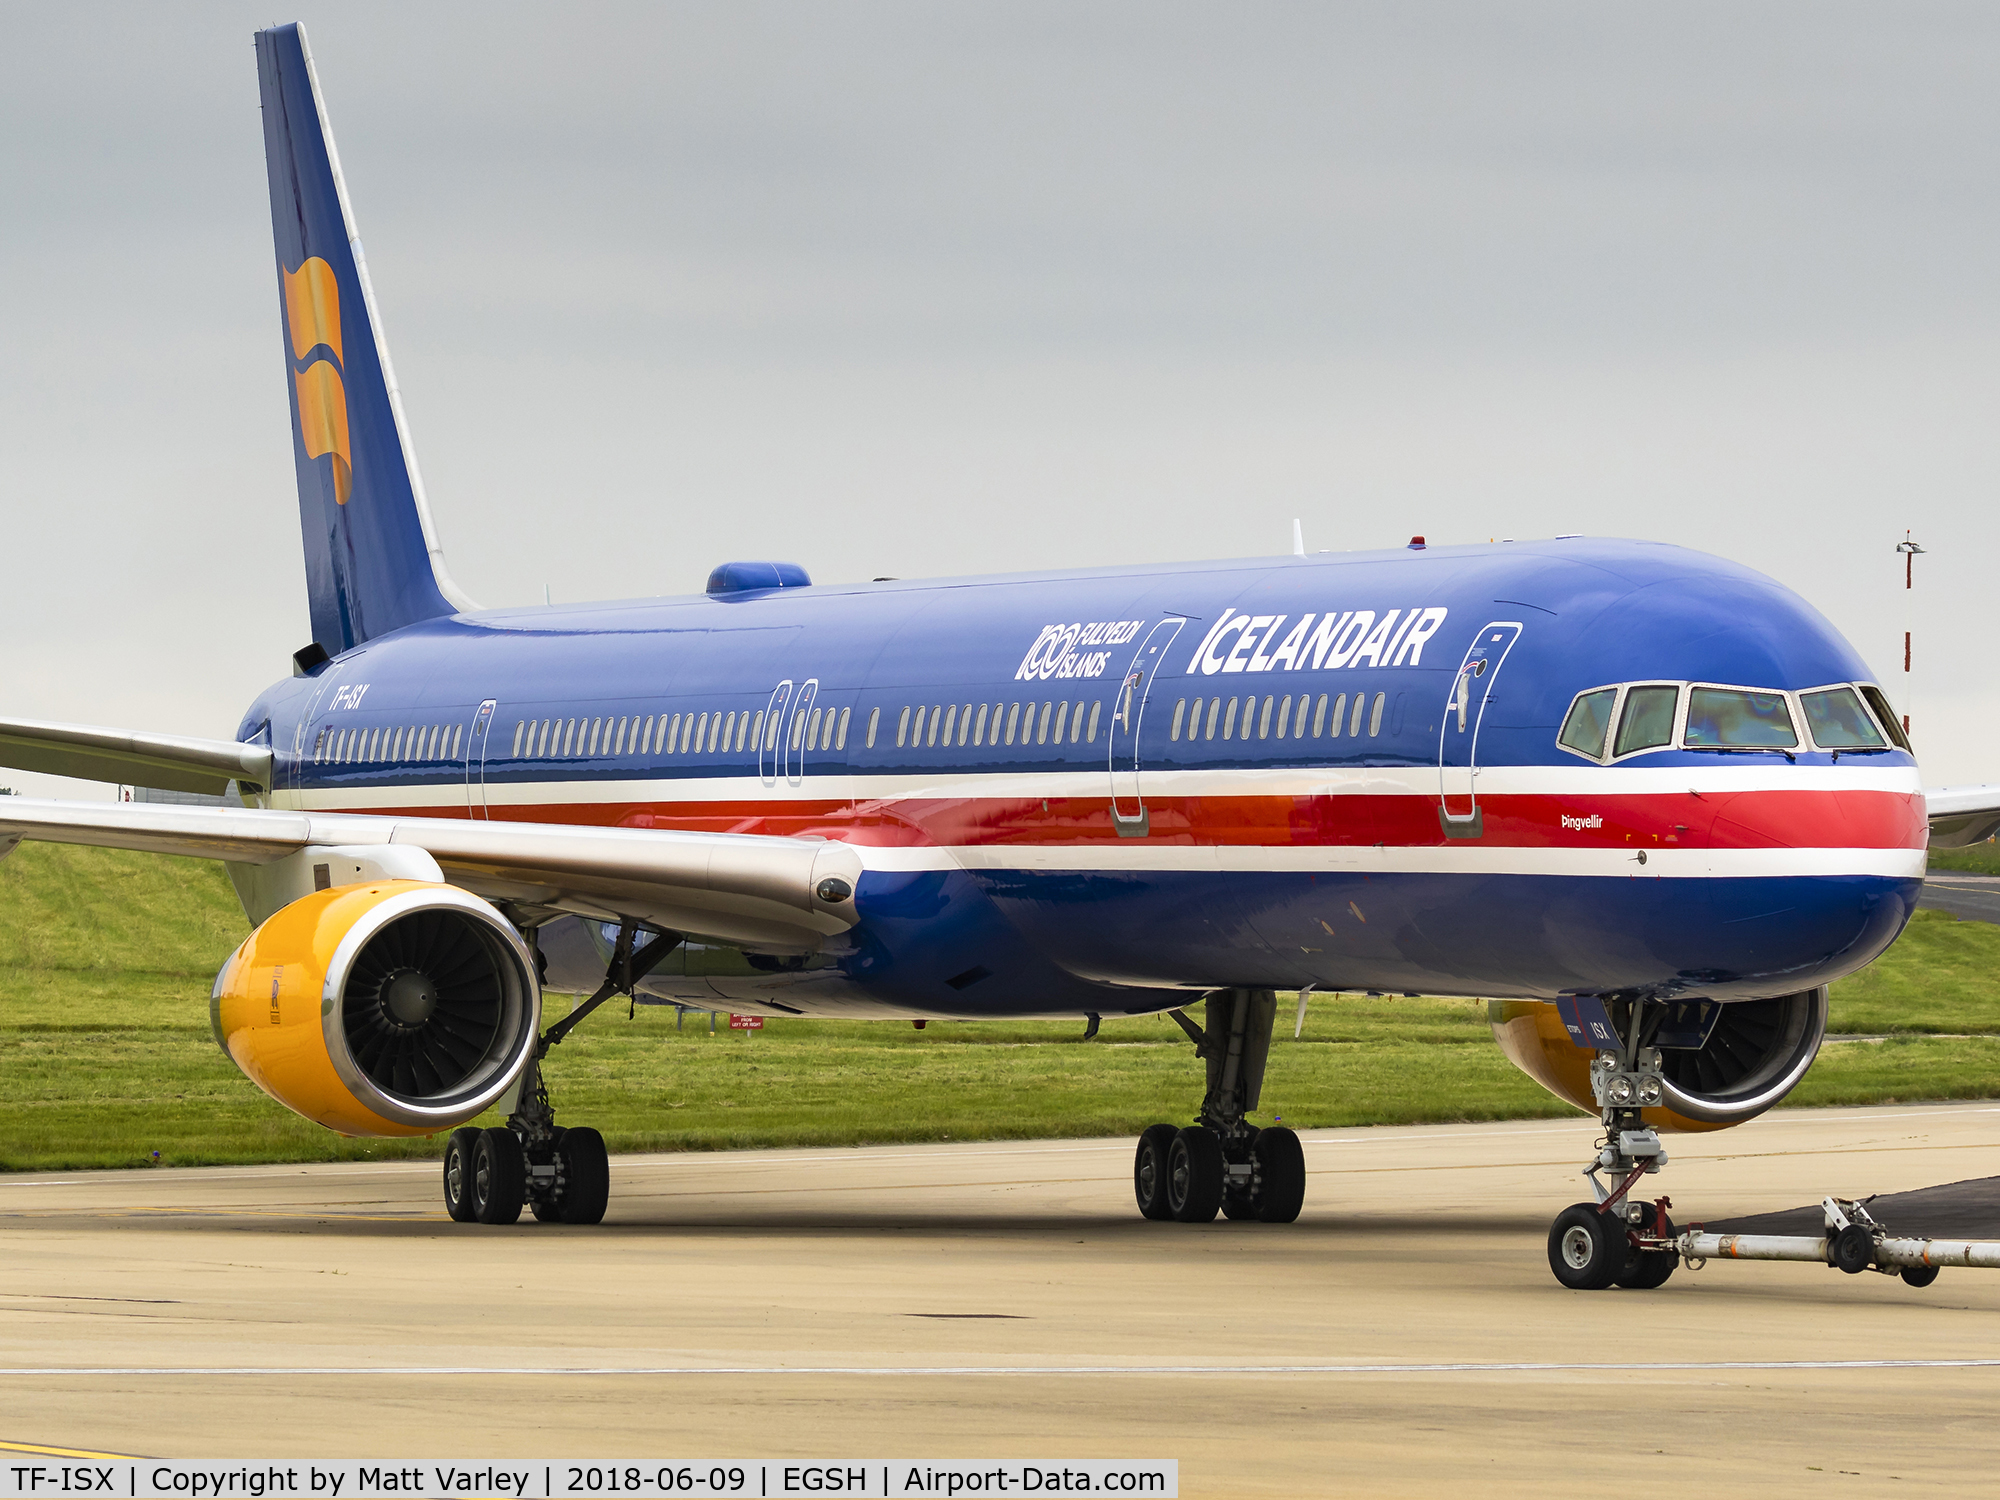 TF-ISX, 2000 Boeing 757-3E7 C/N 30179, Fresh out of Air livery in a special Icelandair colour scheme